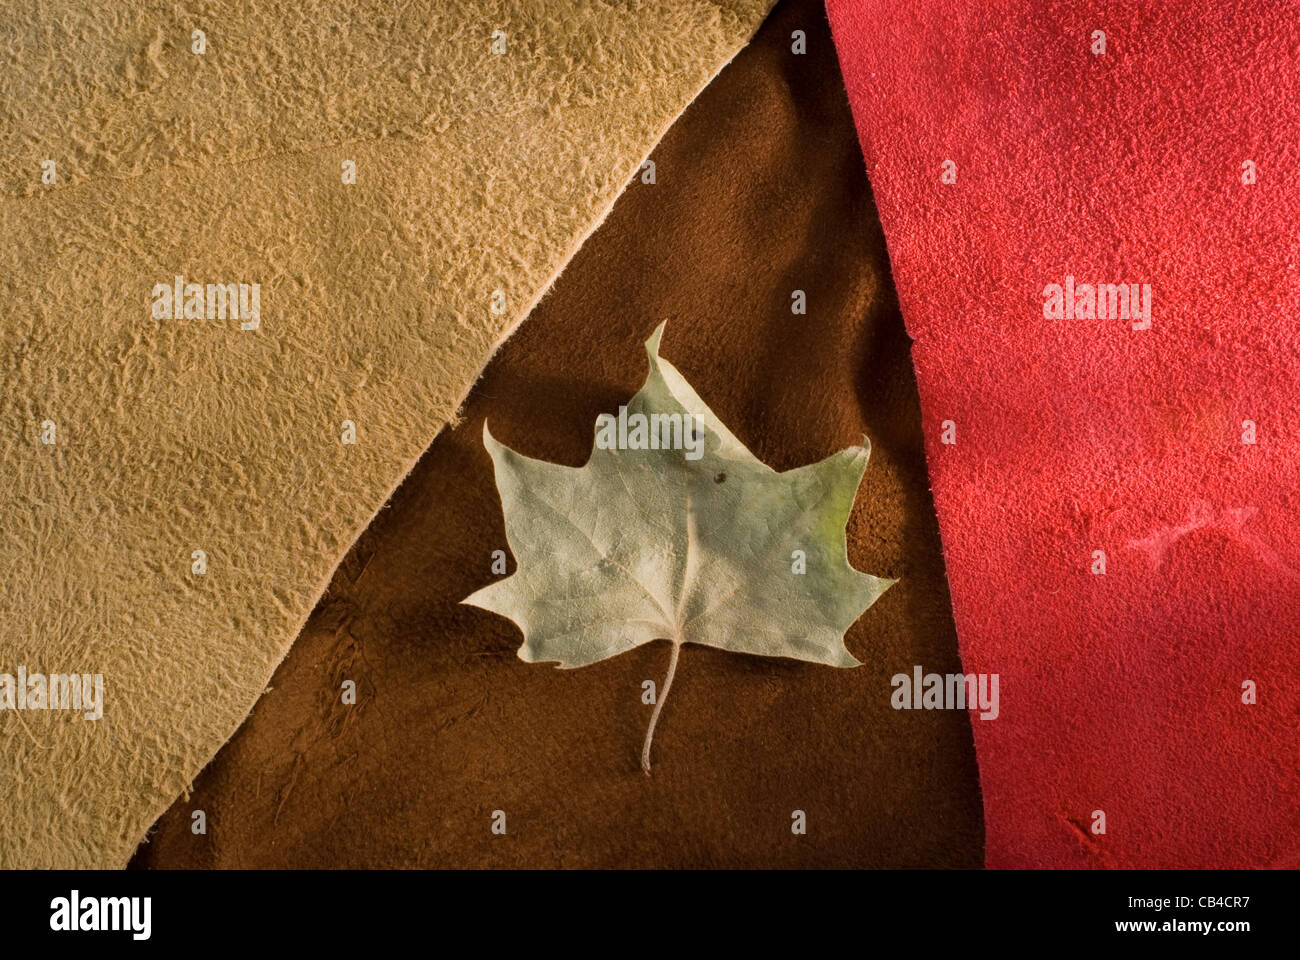 Red, brown, and beige cow leather texture close up with autumn leaf. Useful as background. Stock Photo